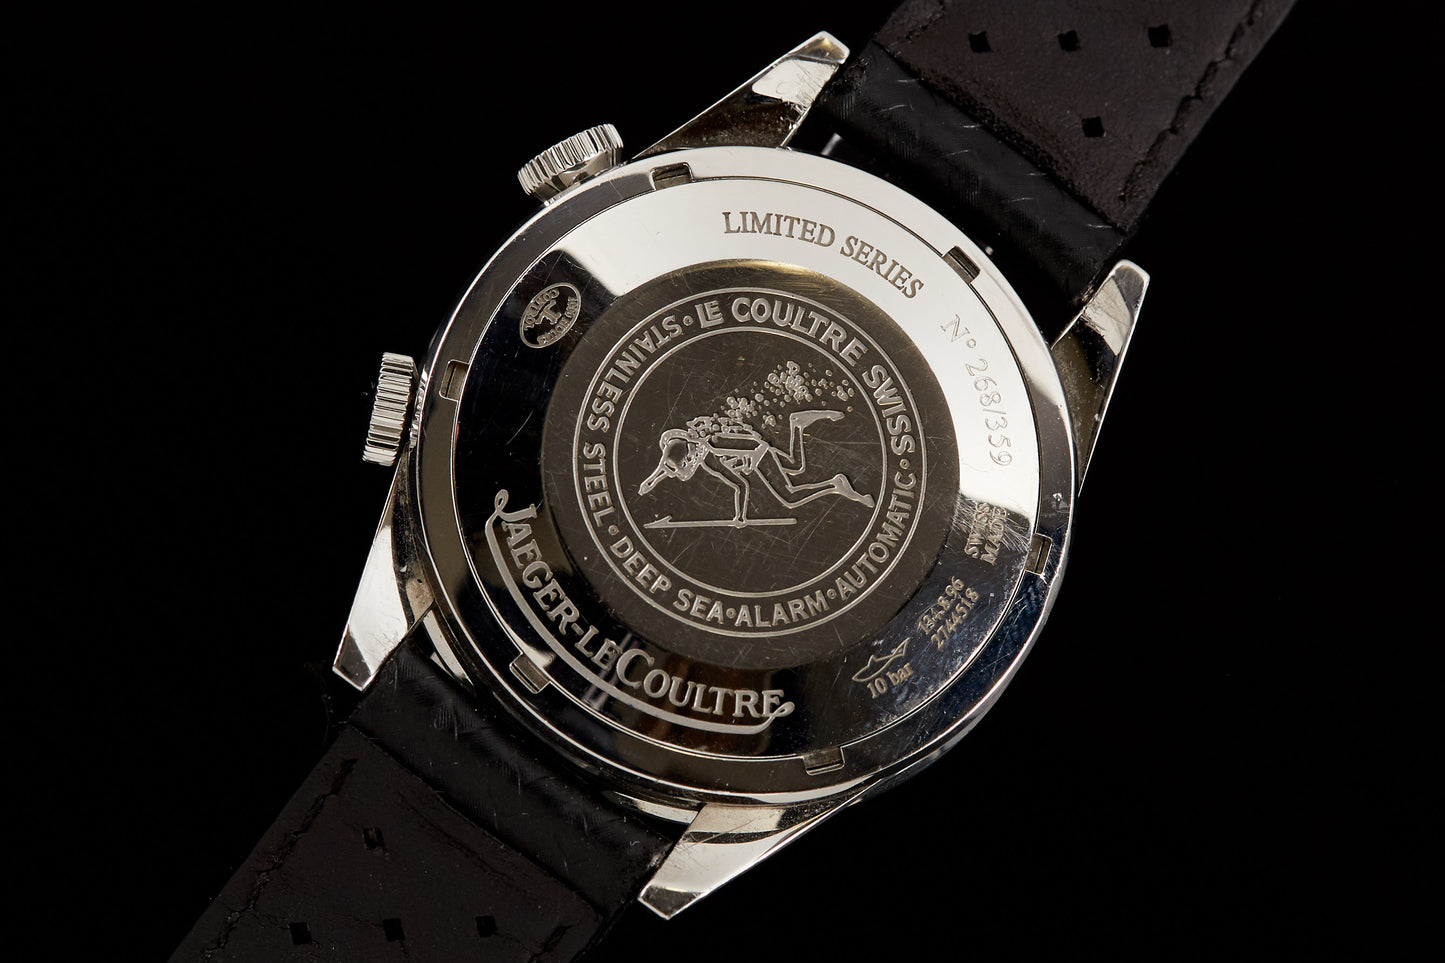 Jaeger-LeCoultre Tribute to Deep Sea Alarm